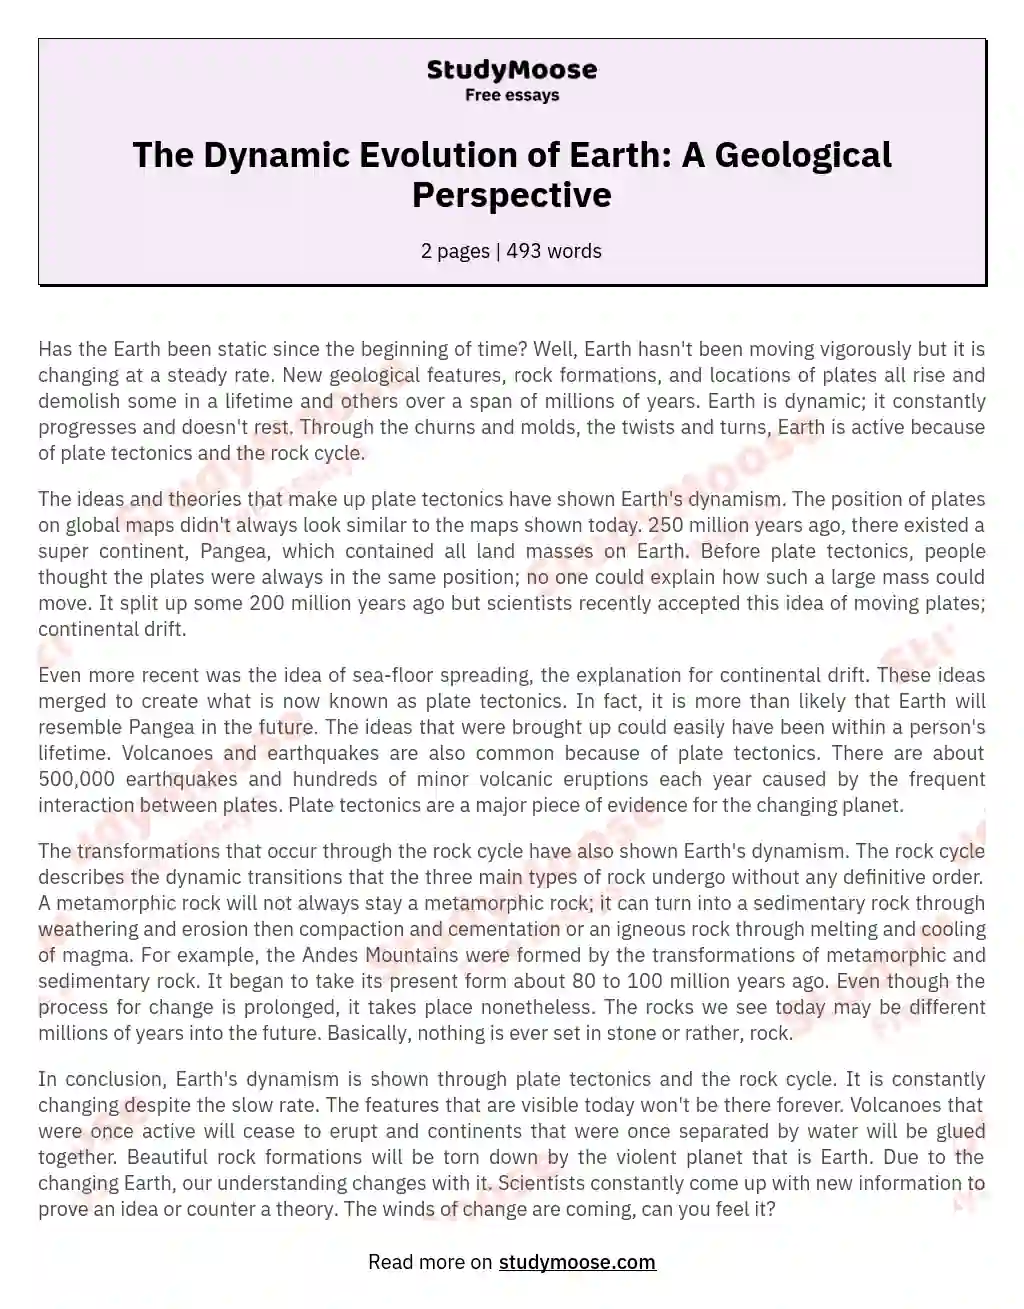 The Dynamic Evolution of Earth: A Geological Perspective essay